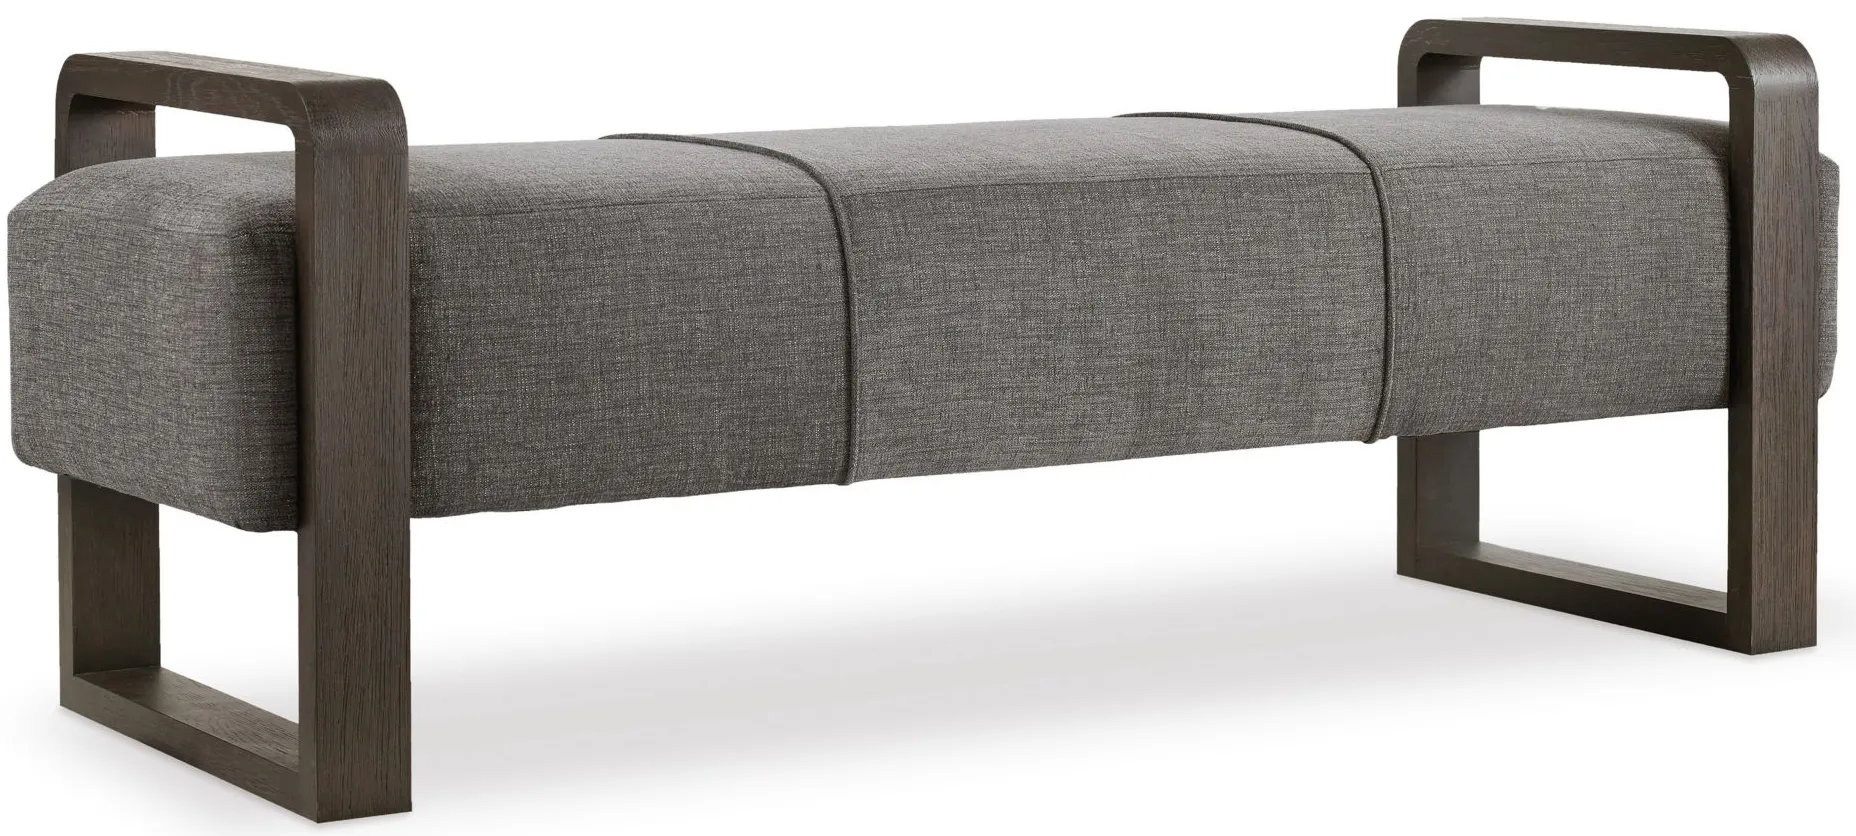 Curata Upholstered Bench in Dark Wood by Hooker Furniture